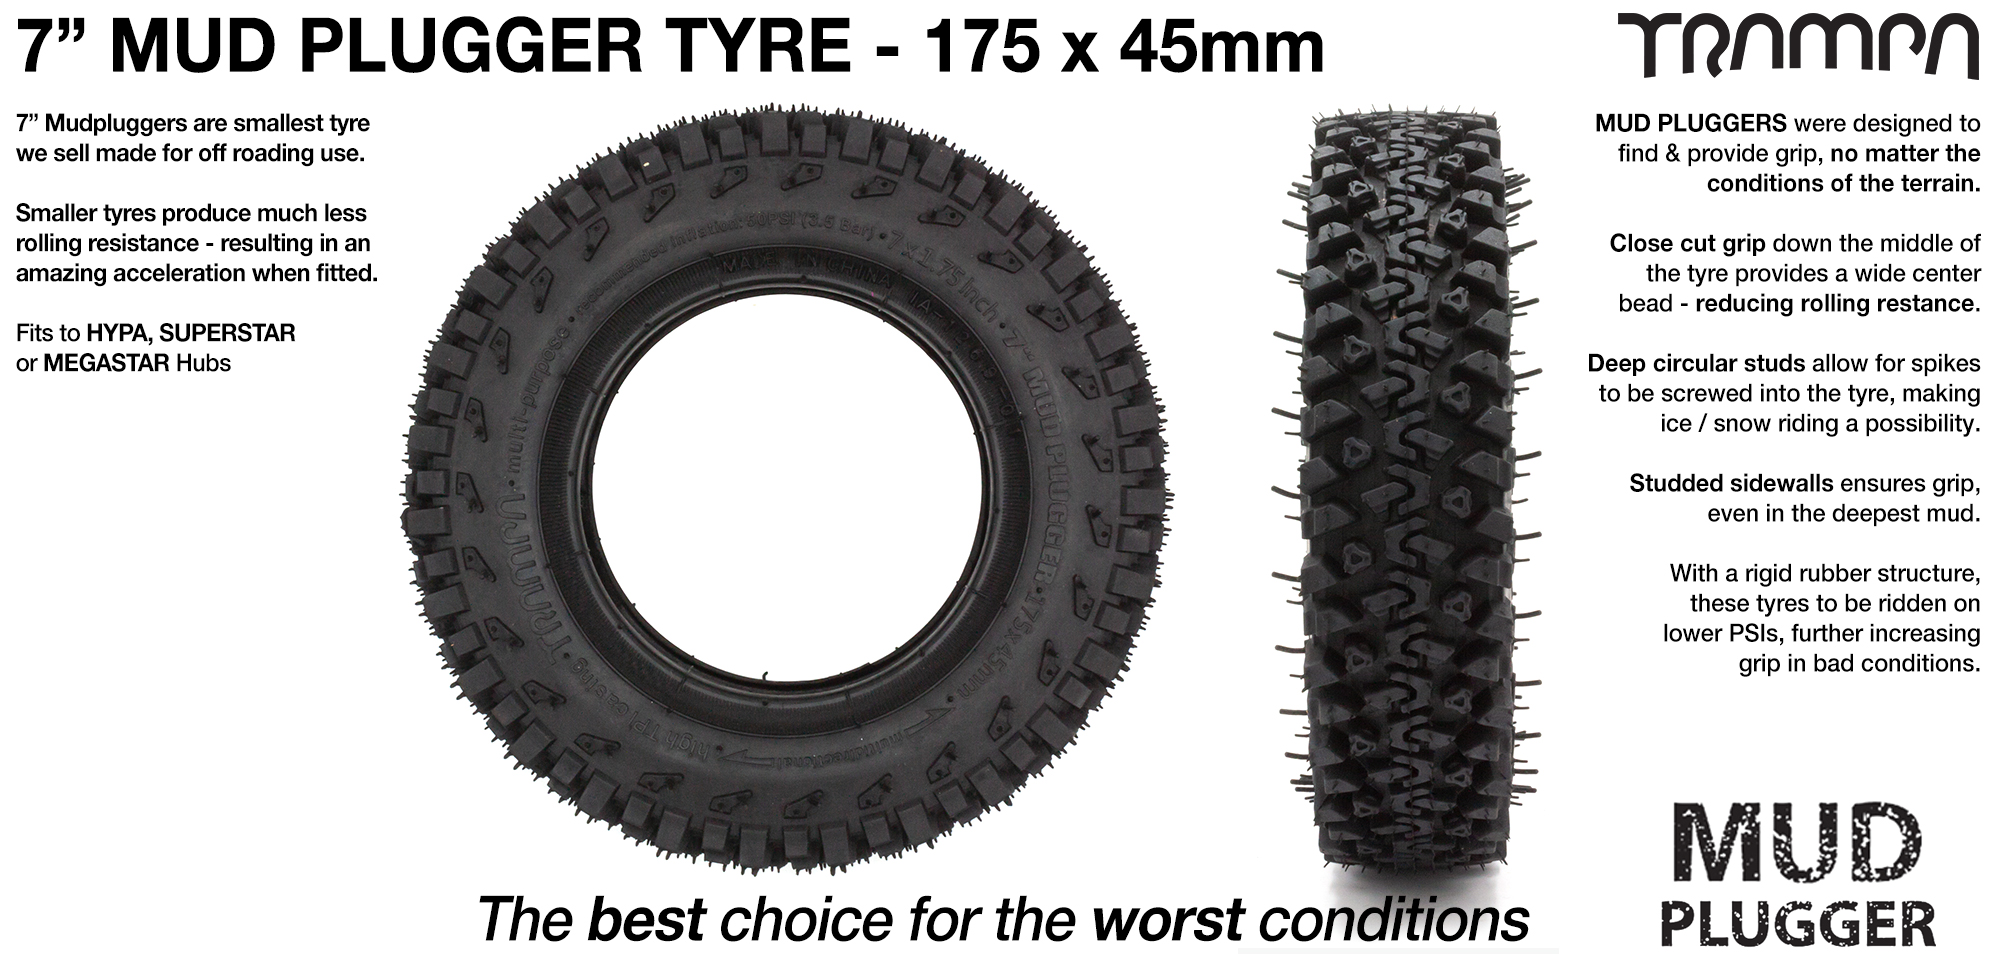 TRAMPA MUD-PLUGGER 7 Inch Tyre measures 3.75x 2x 7 Inch or 175x 45mm with 3.75 inch Rim & fits all 3.75 inch Hubs